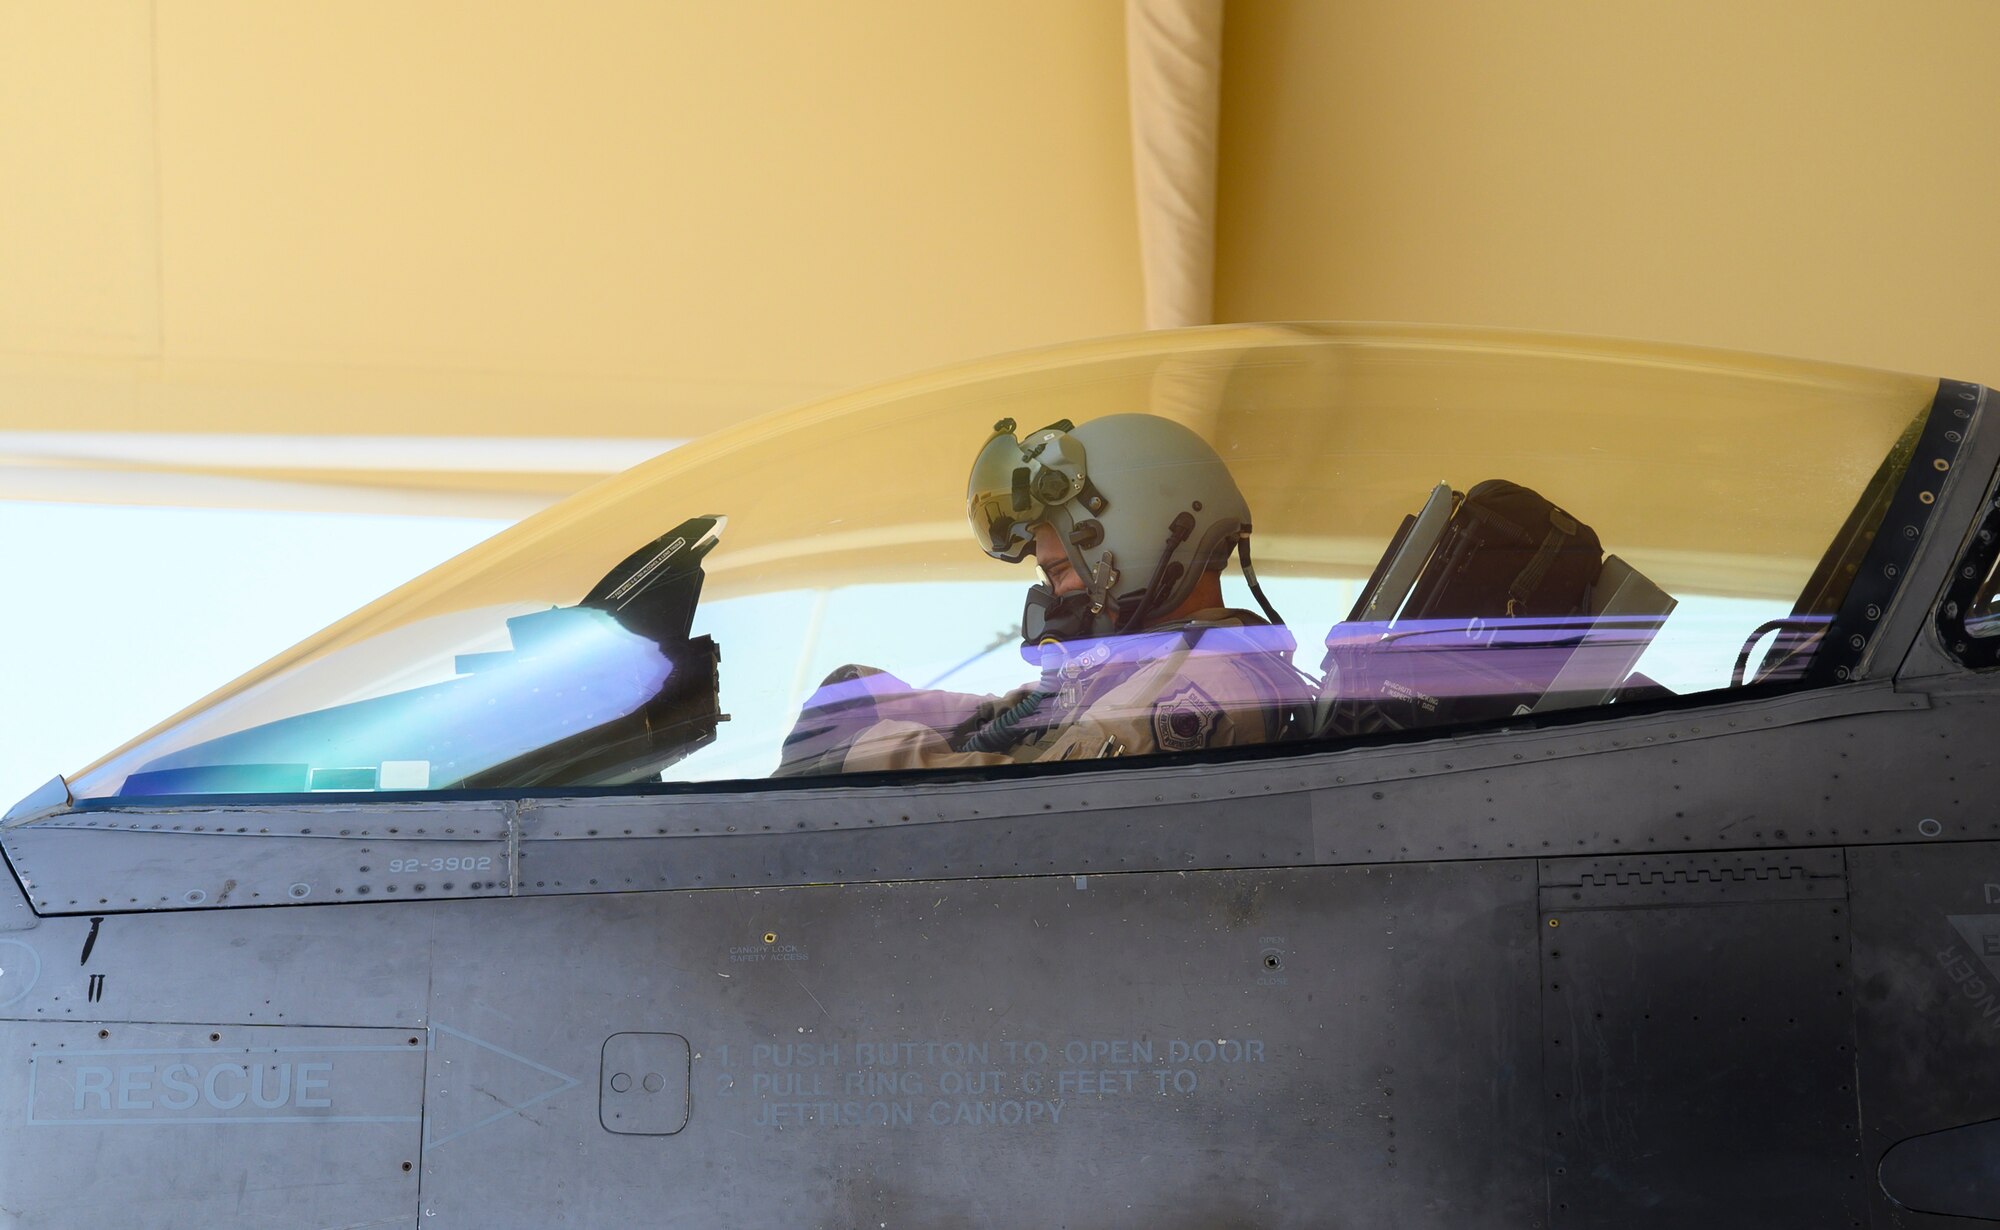 U.S. Air Force Brig. Gen. Robert Davis, 378th Air Expeditionary Wing commander, prepares for his flight on a U.S. Air Force F-16 Fighting Falcon, Prince Sultan Air Base, Kingdom of Saudi Arabia, June 20, 2021. Davis, a trained fighter pilot, flew a sortie with the 157th “Swamp Fox” Expeditionary Fighter Squadron, currently deployed to PSAB to bolster defensive capabilities against potential threats in the region. (U.S. Air Force photo by Senior Airman Samuel Earick)